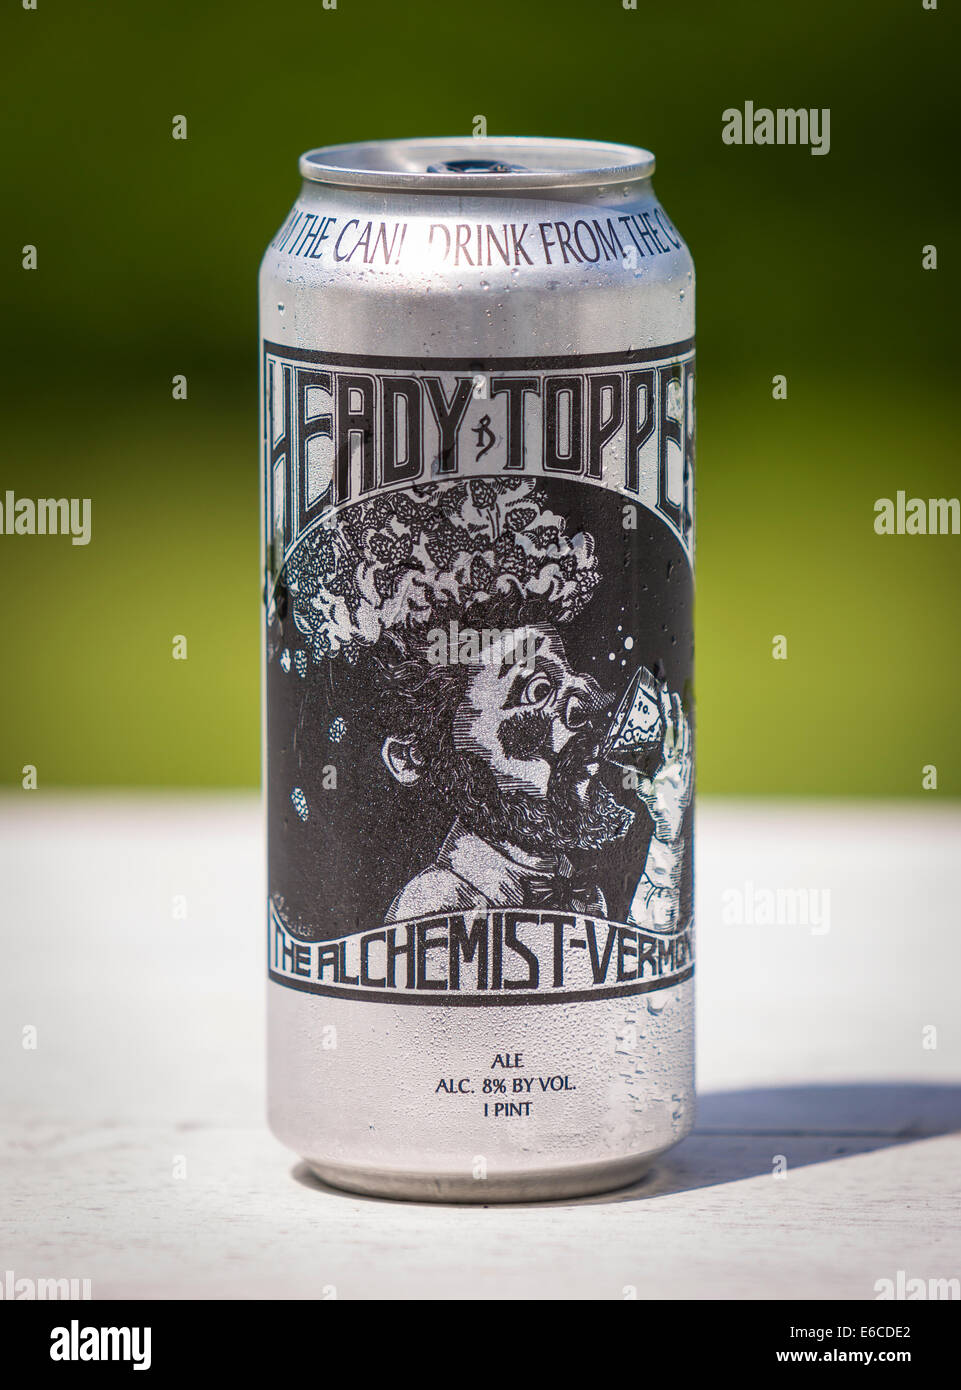 VERMONT, USA - Heady Topper ale, a beer produced by The Alchemist Brewery. 16 ounce can Stock Photo